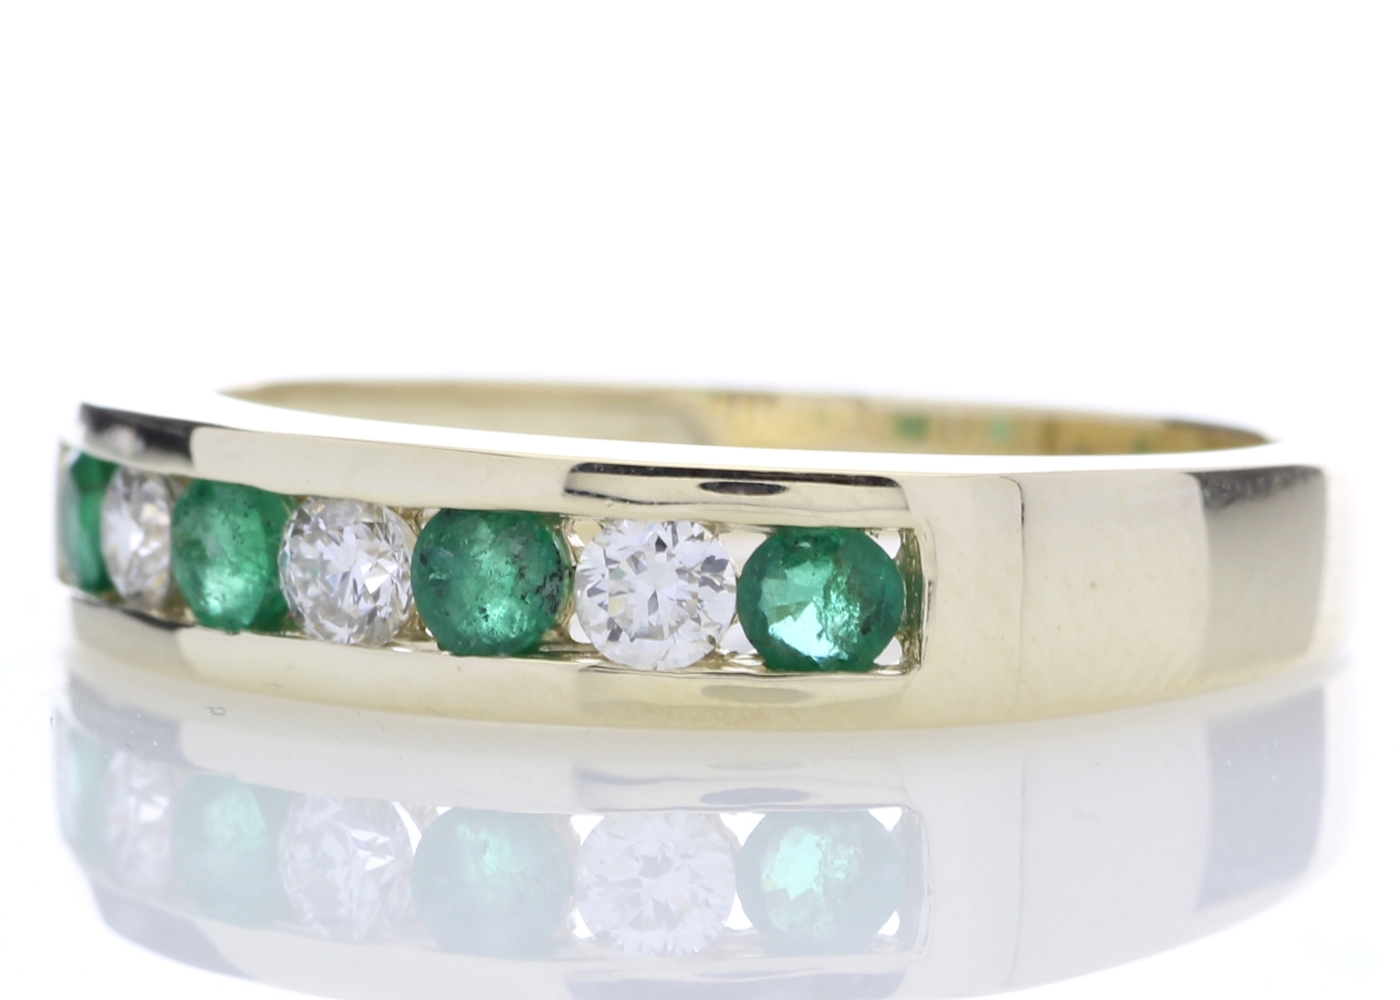 9ct Yellow Gold Channel Set Semi Eternity Diamond And Emerald Ring 0.25 Carats - Image 2 of 5